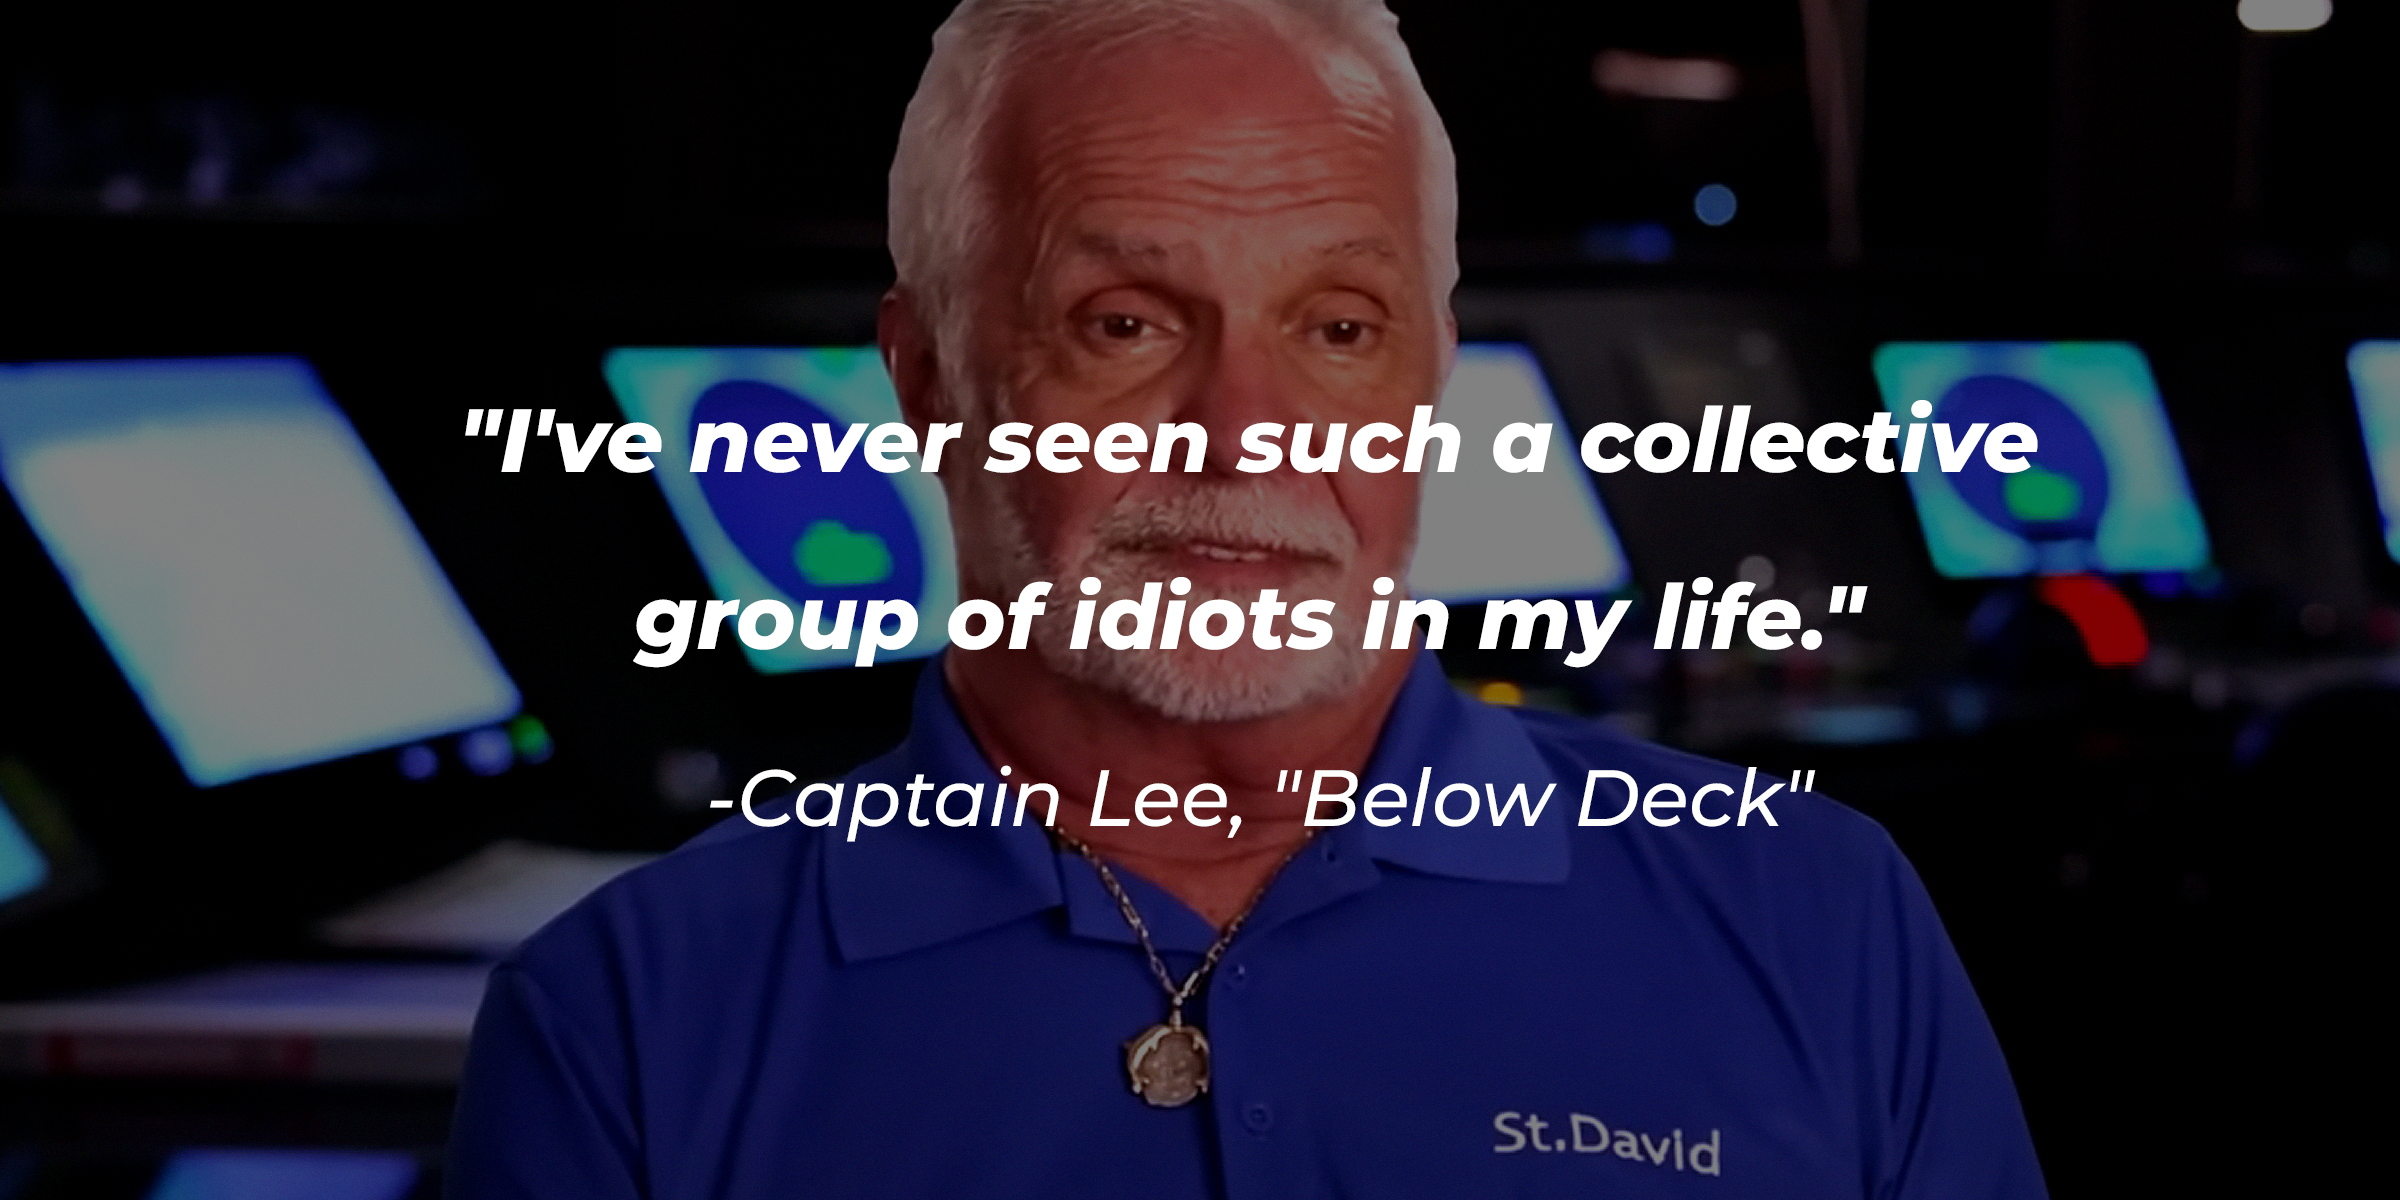 Captain Lee with his quote: "I've never seen such a collective group of idiots in my life." | Source: Youtube.com/bravo